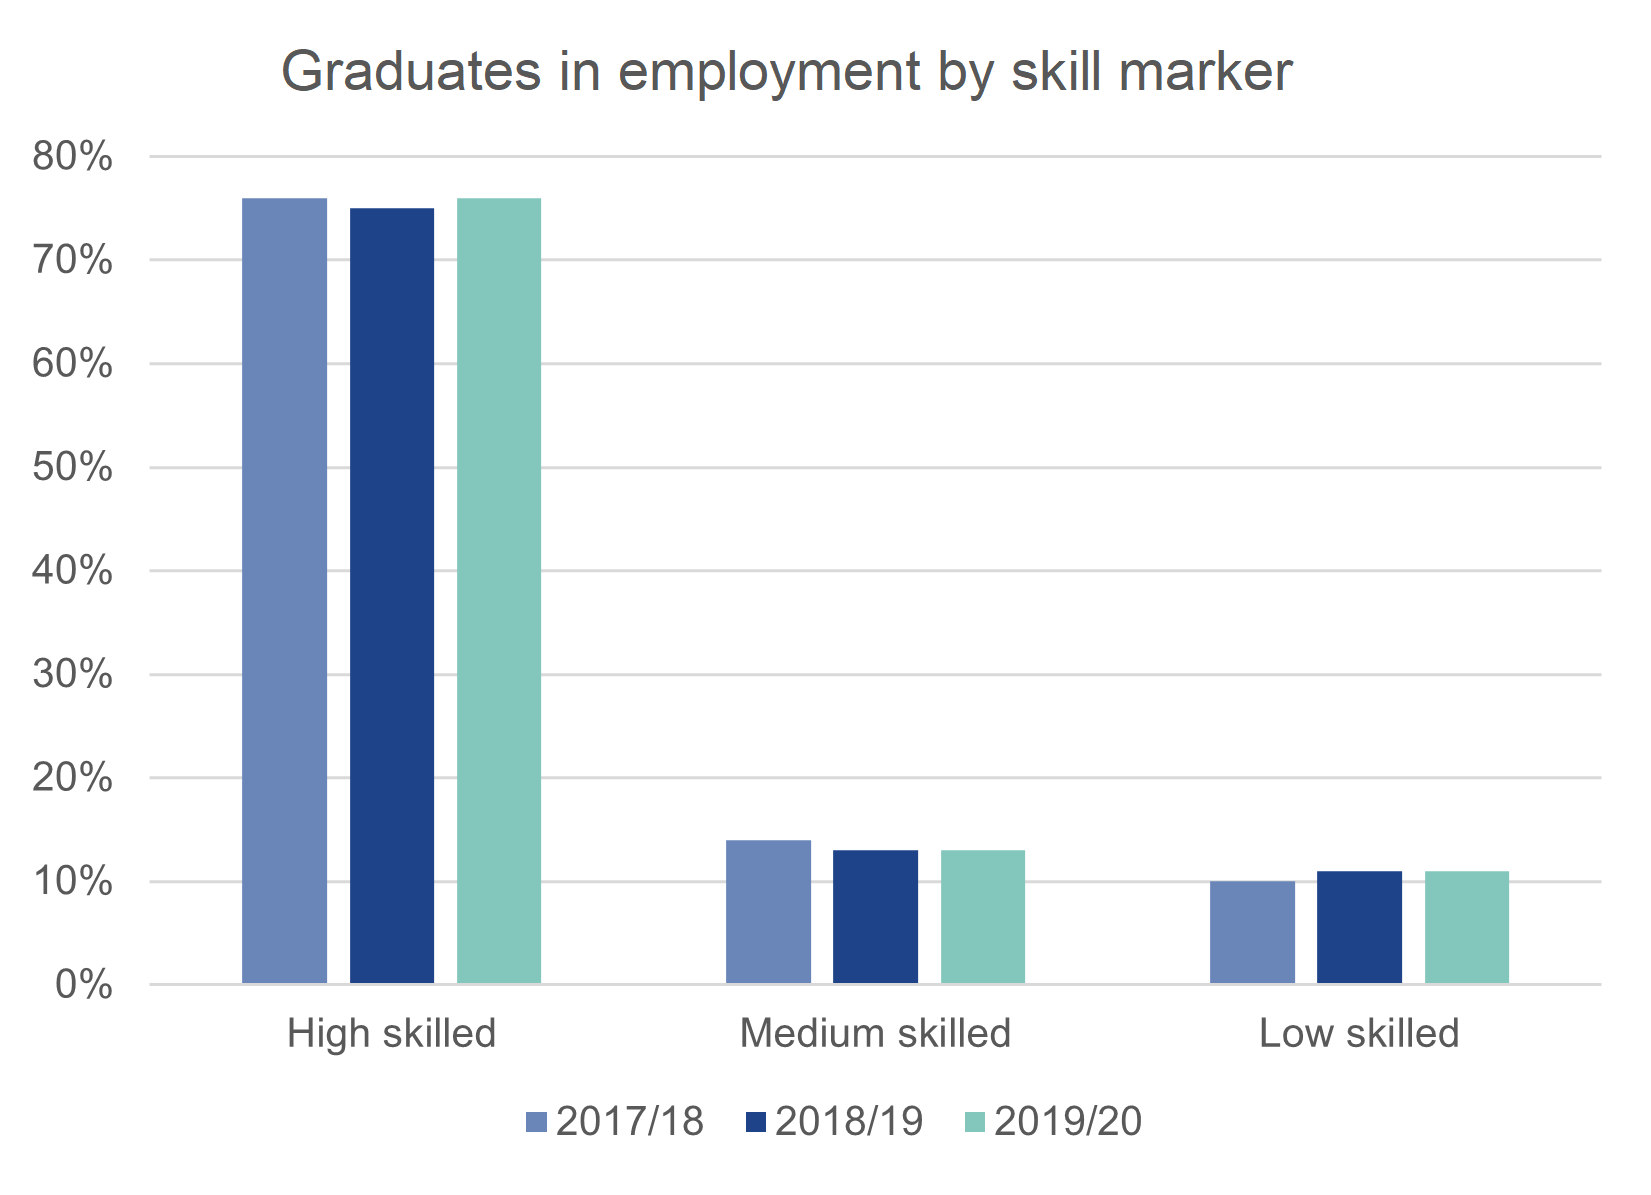 In all years of Graduate Outcomes over 75% of employed graduates were in high skilled occupations (SOC groups 1-3)